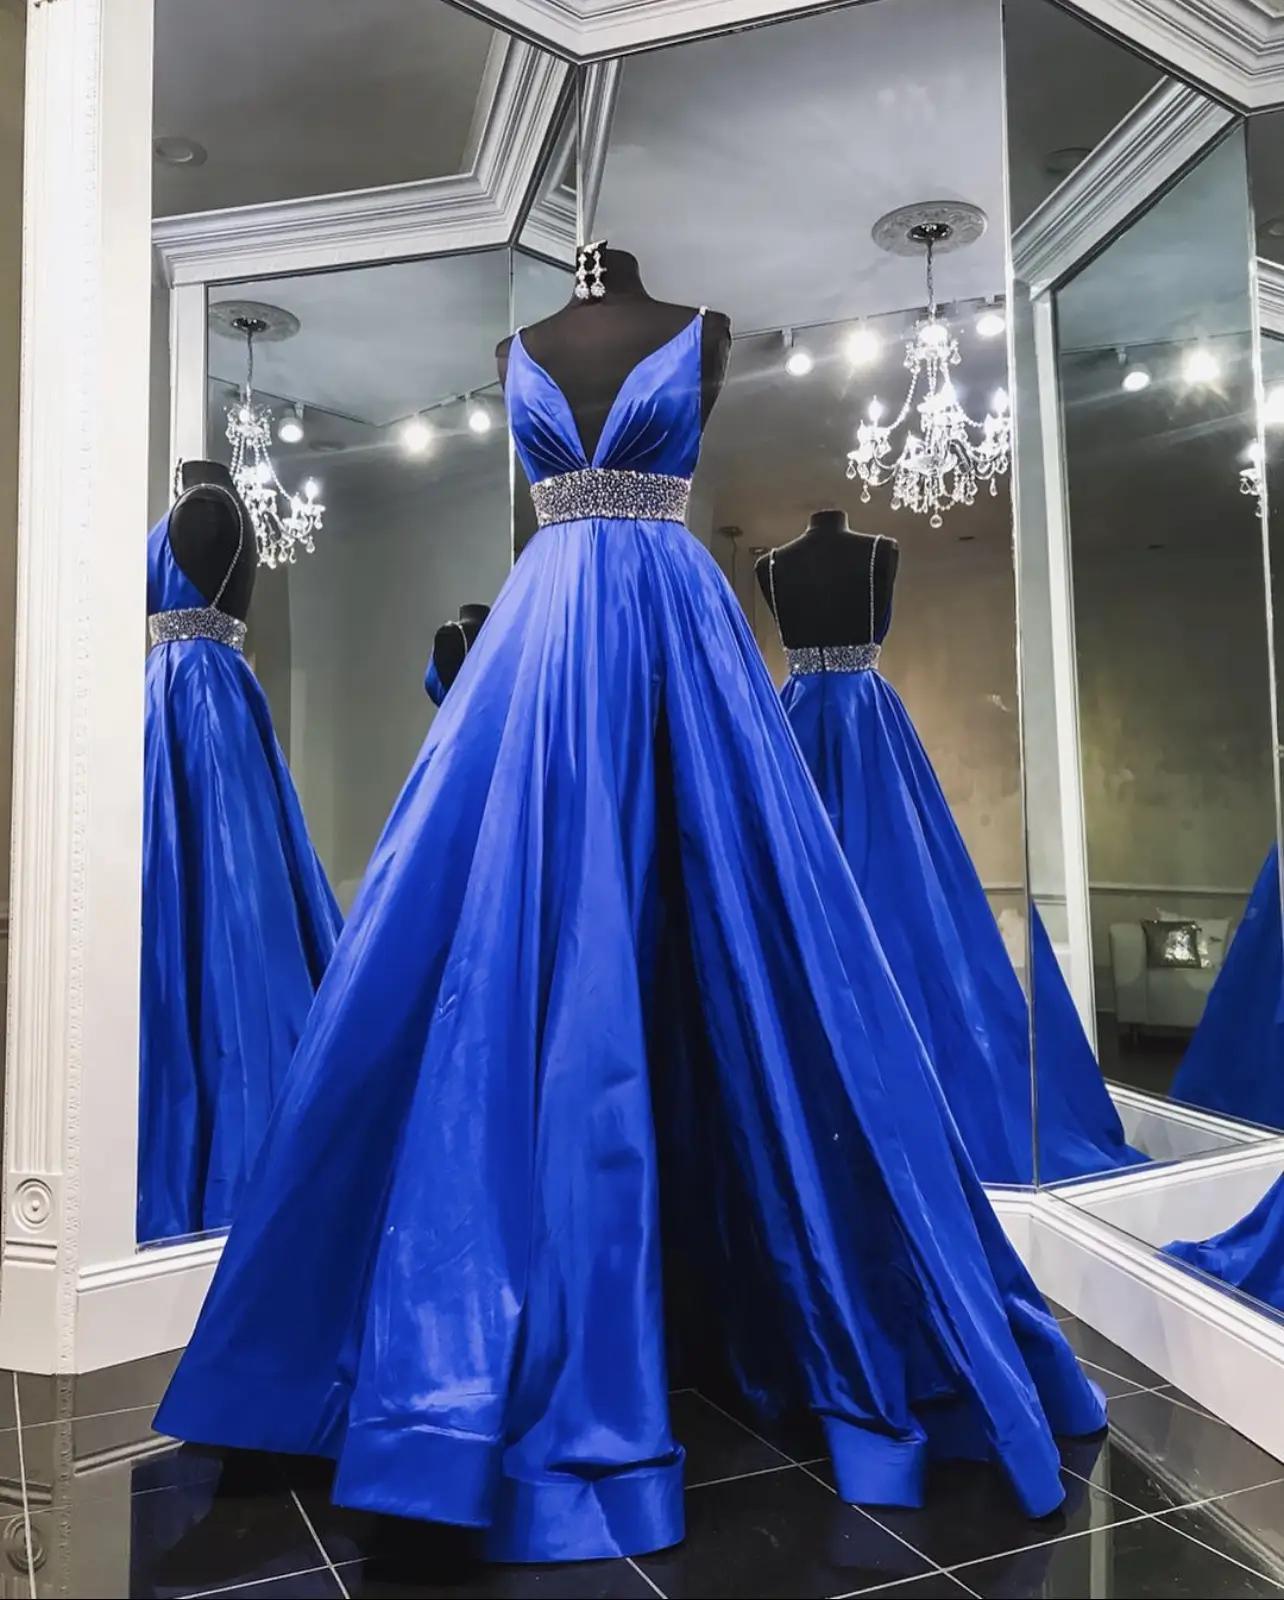 Explore Our Couture Pageant Dresses! Image